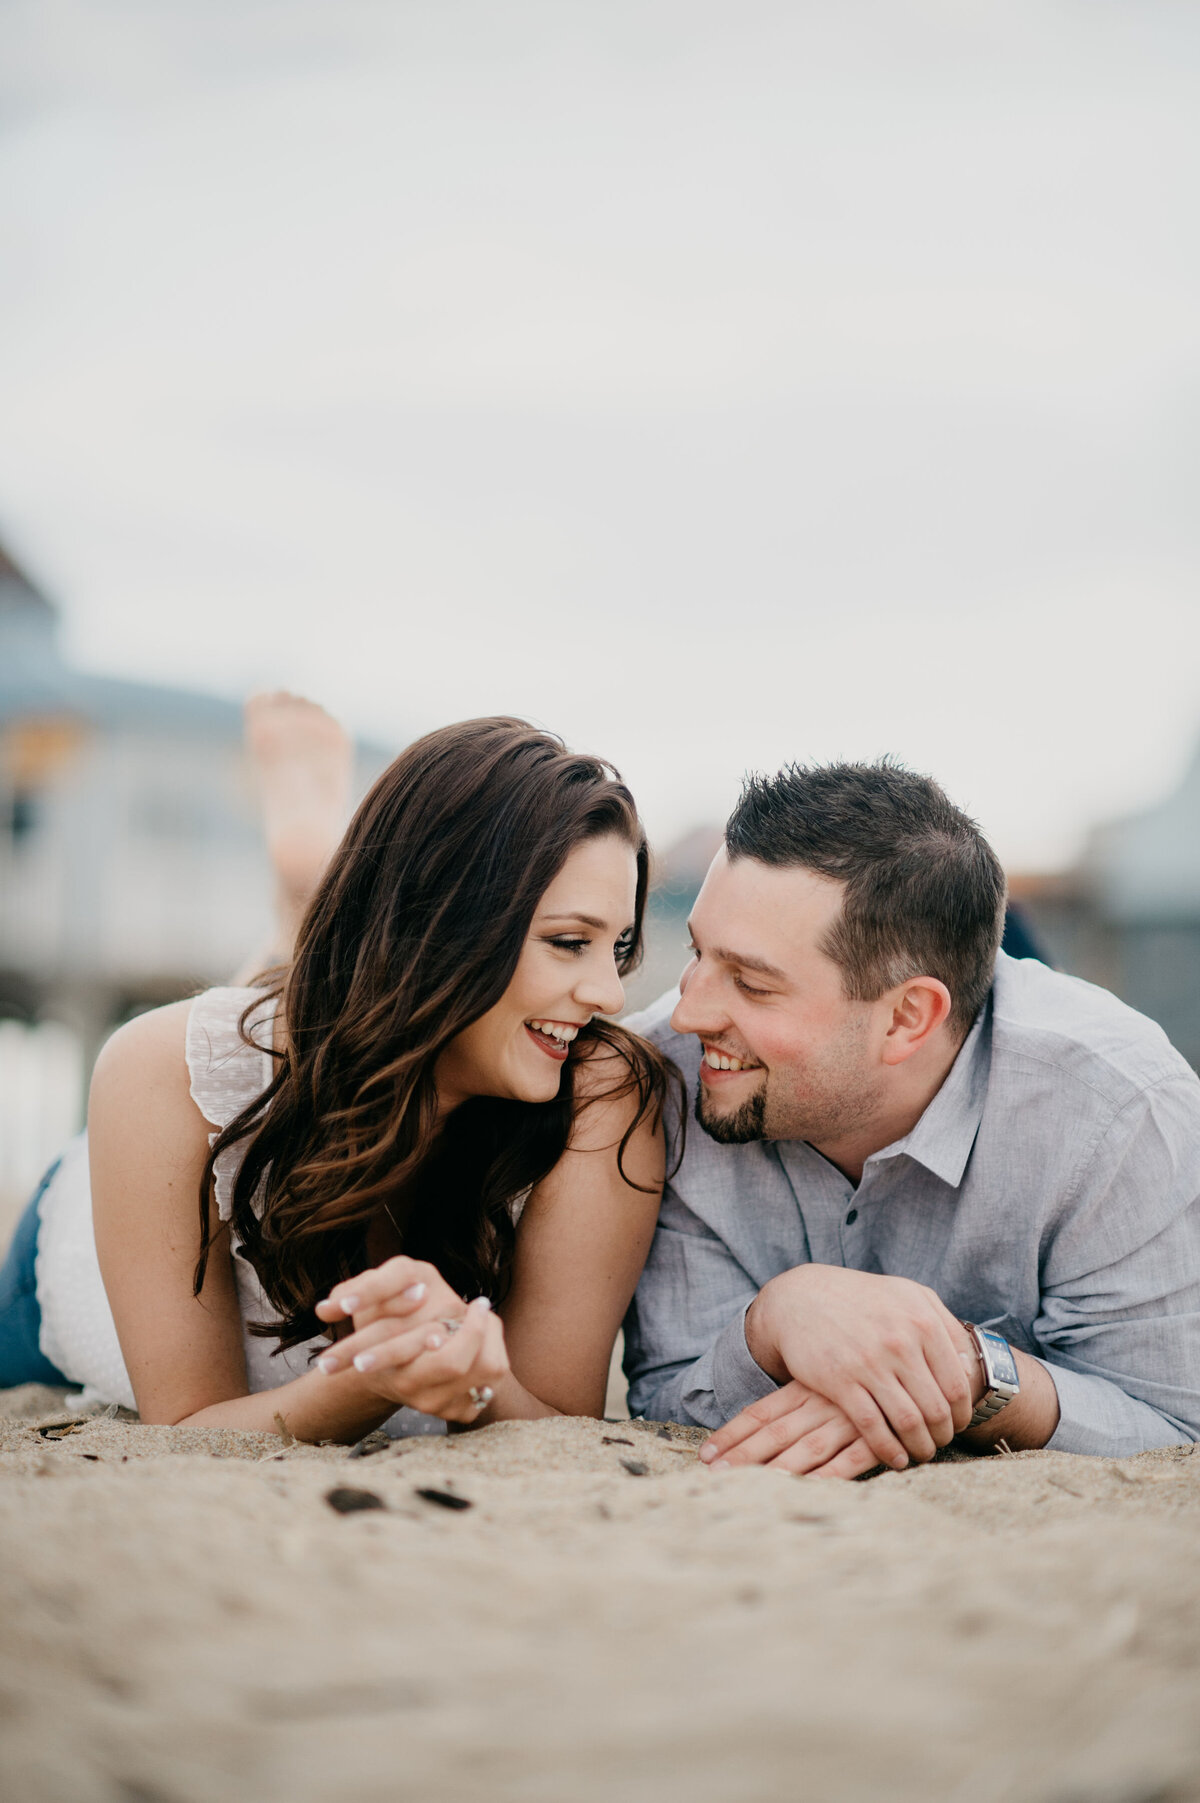 Maine wedding photographer Kim Chapman does engagement shoots as well